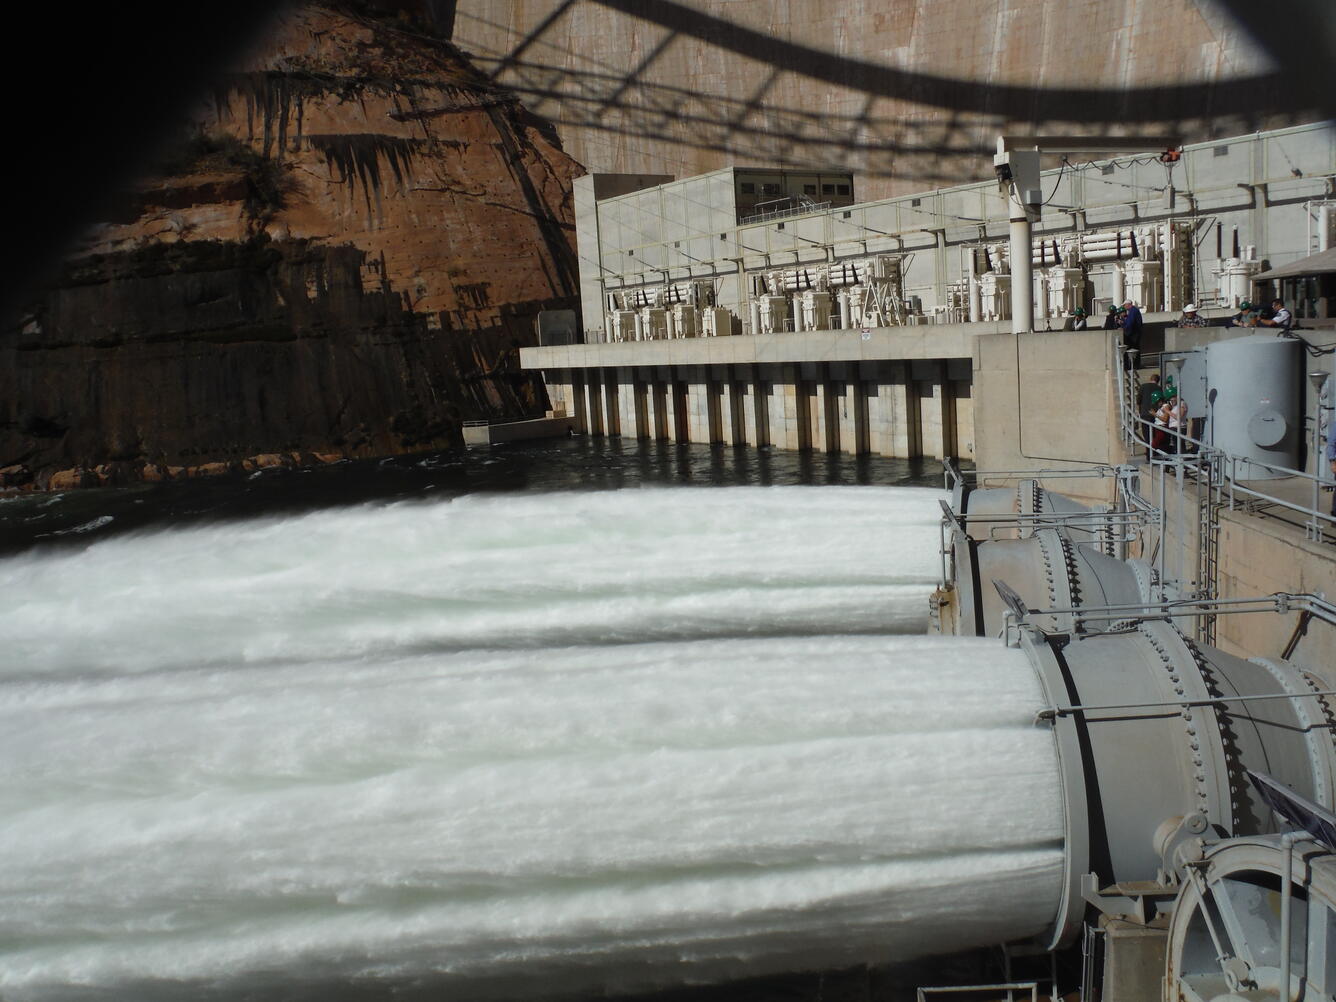 Glen Canyon Dam jet tubes releasing water into the Colorado River for a high flow experiment.